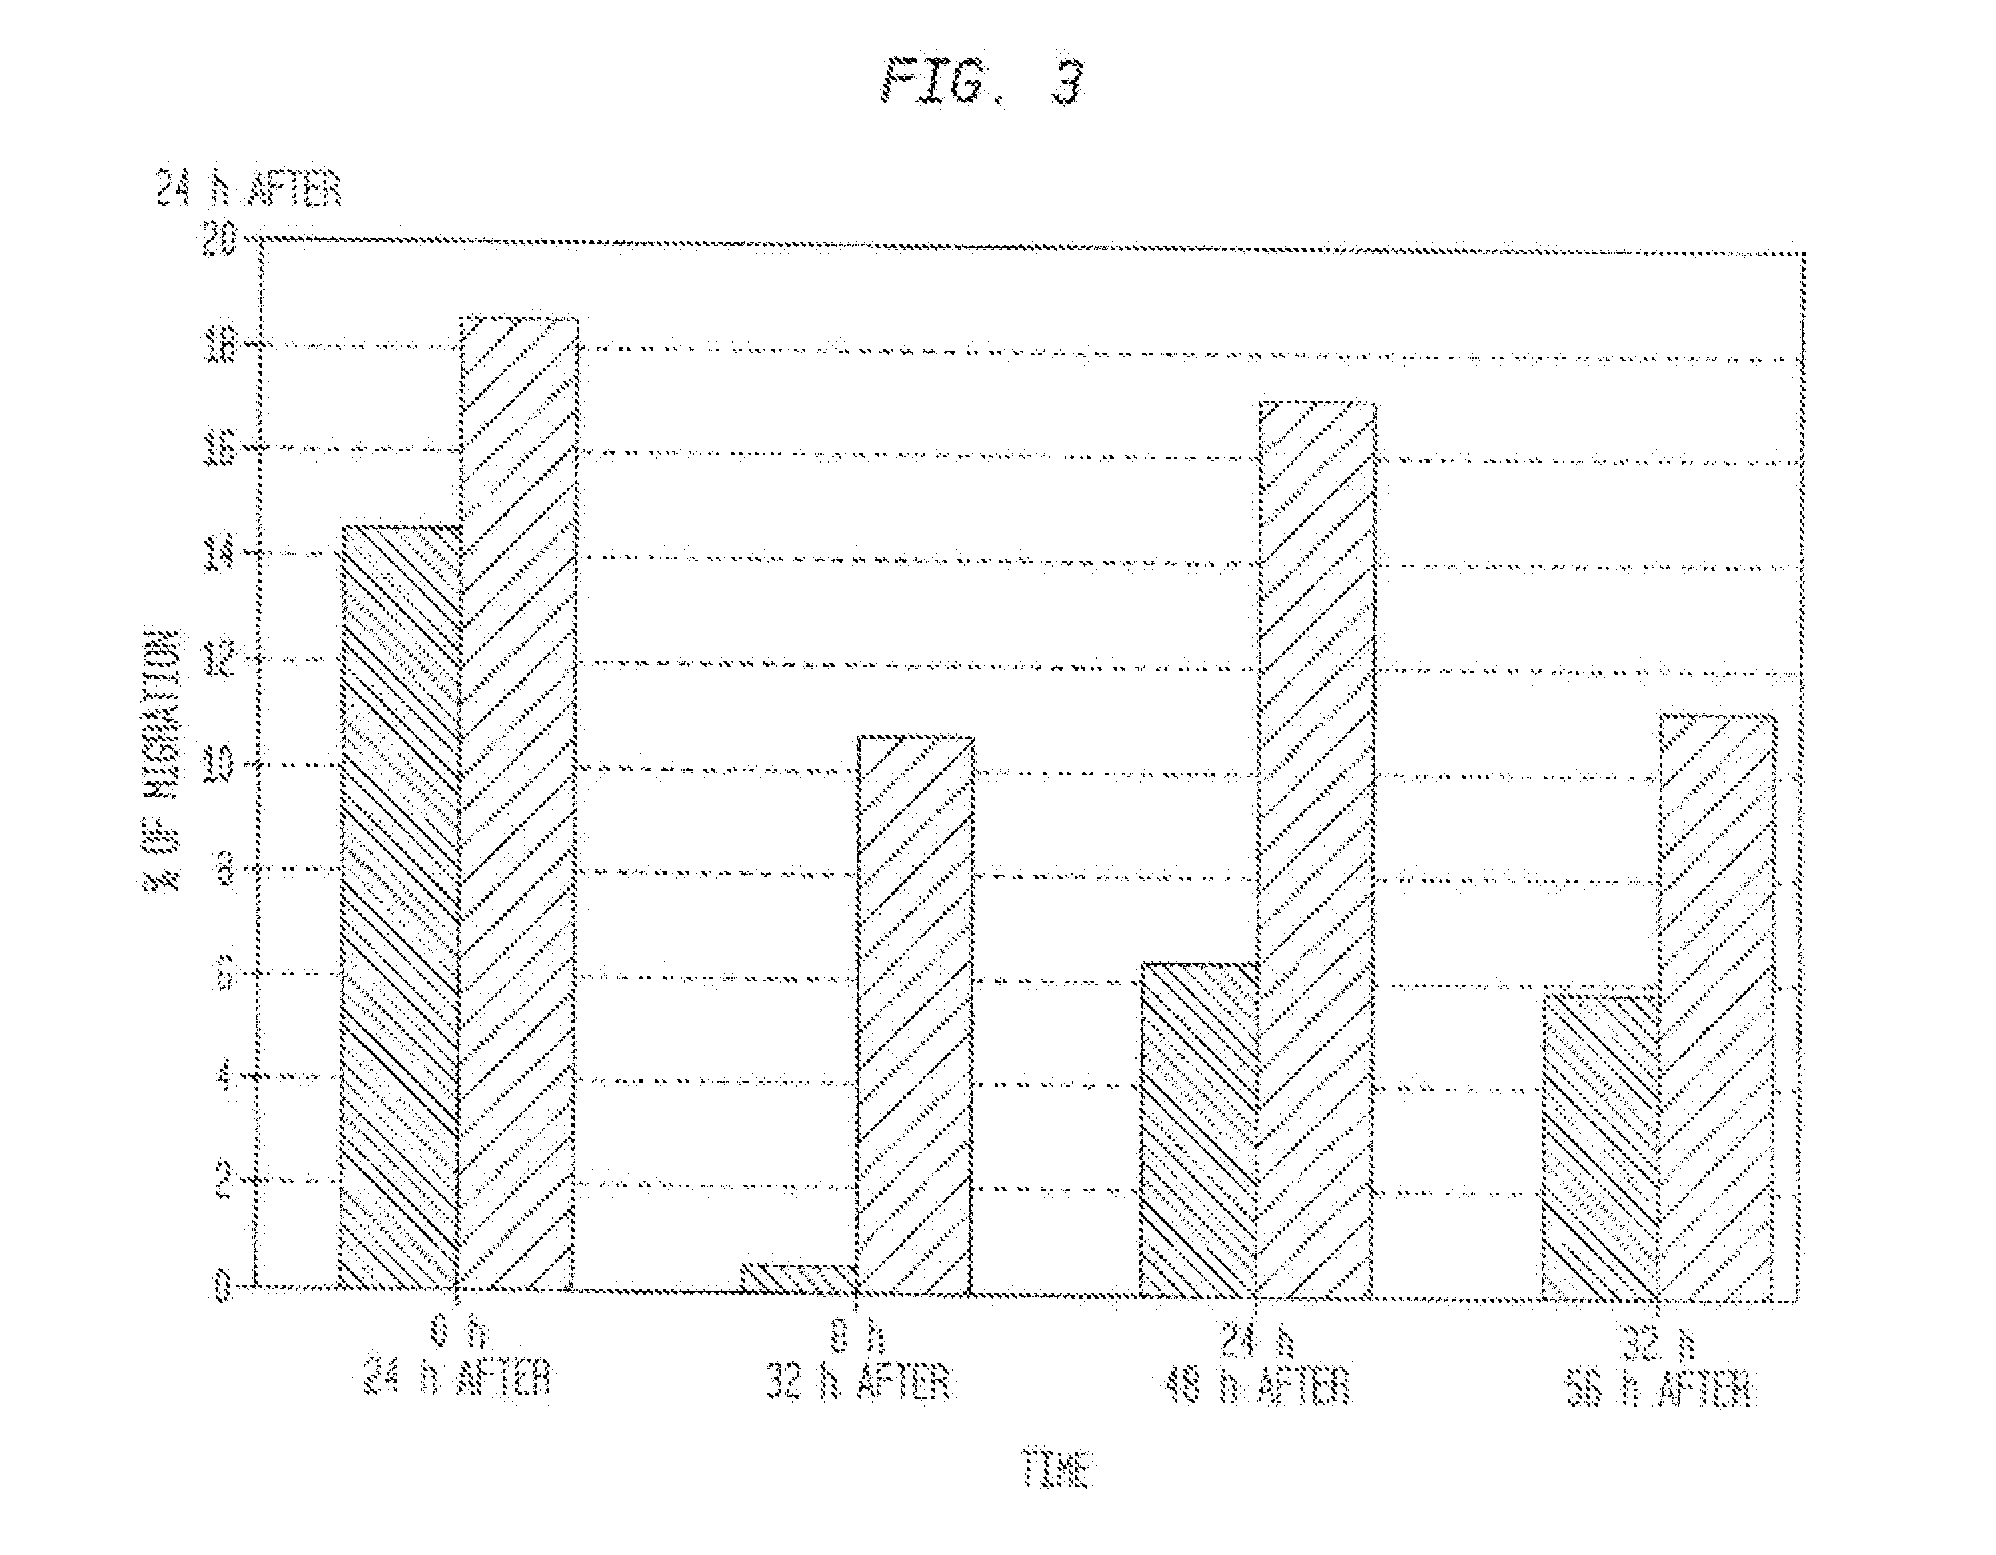 Compositions and methods for treating progressive myocardial injury due to a vascular insufficiency